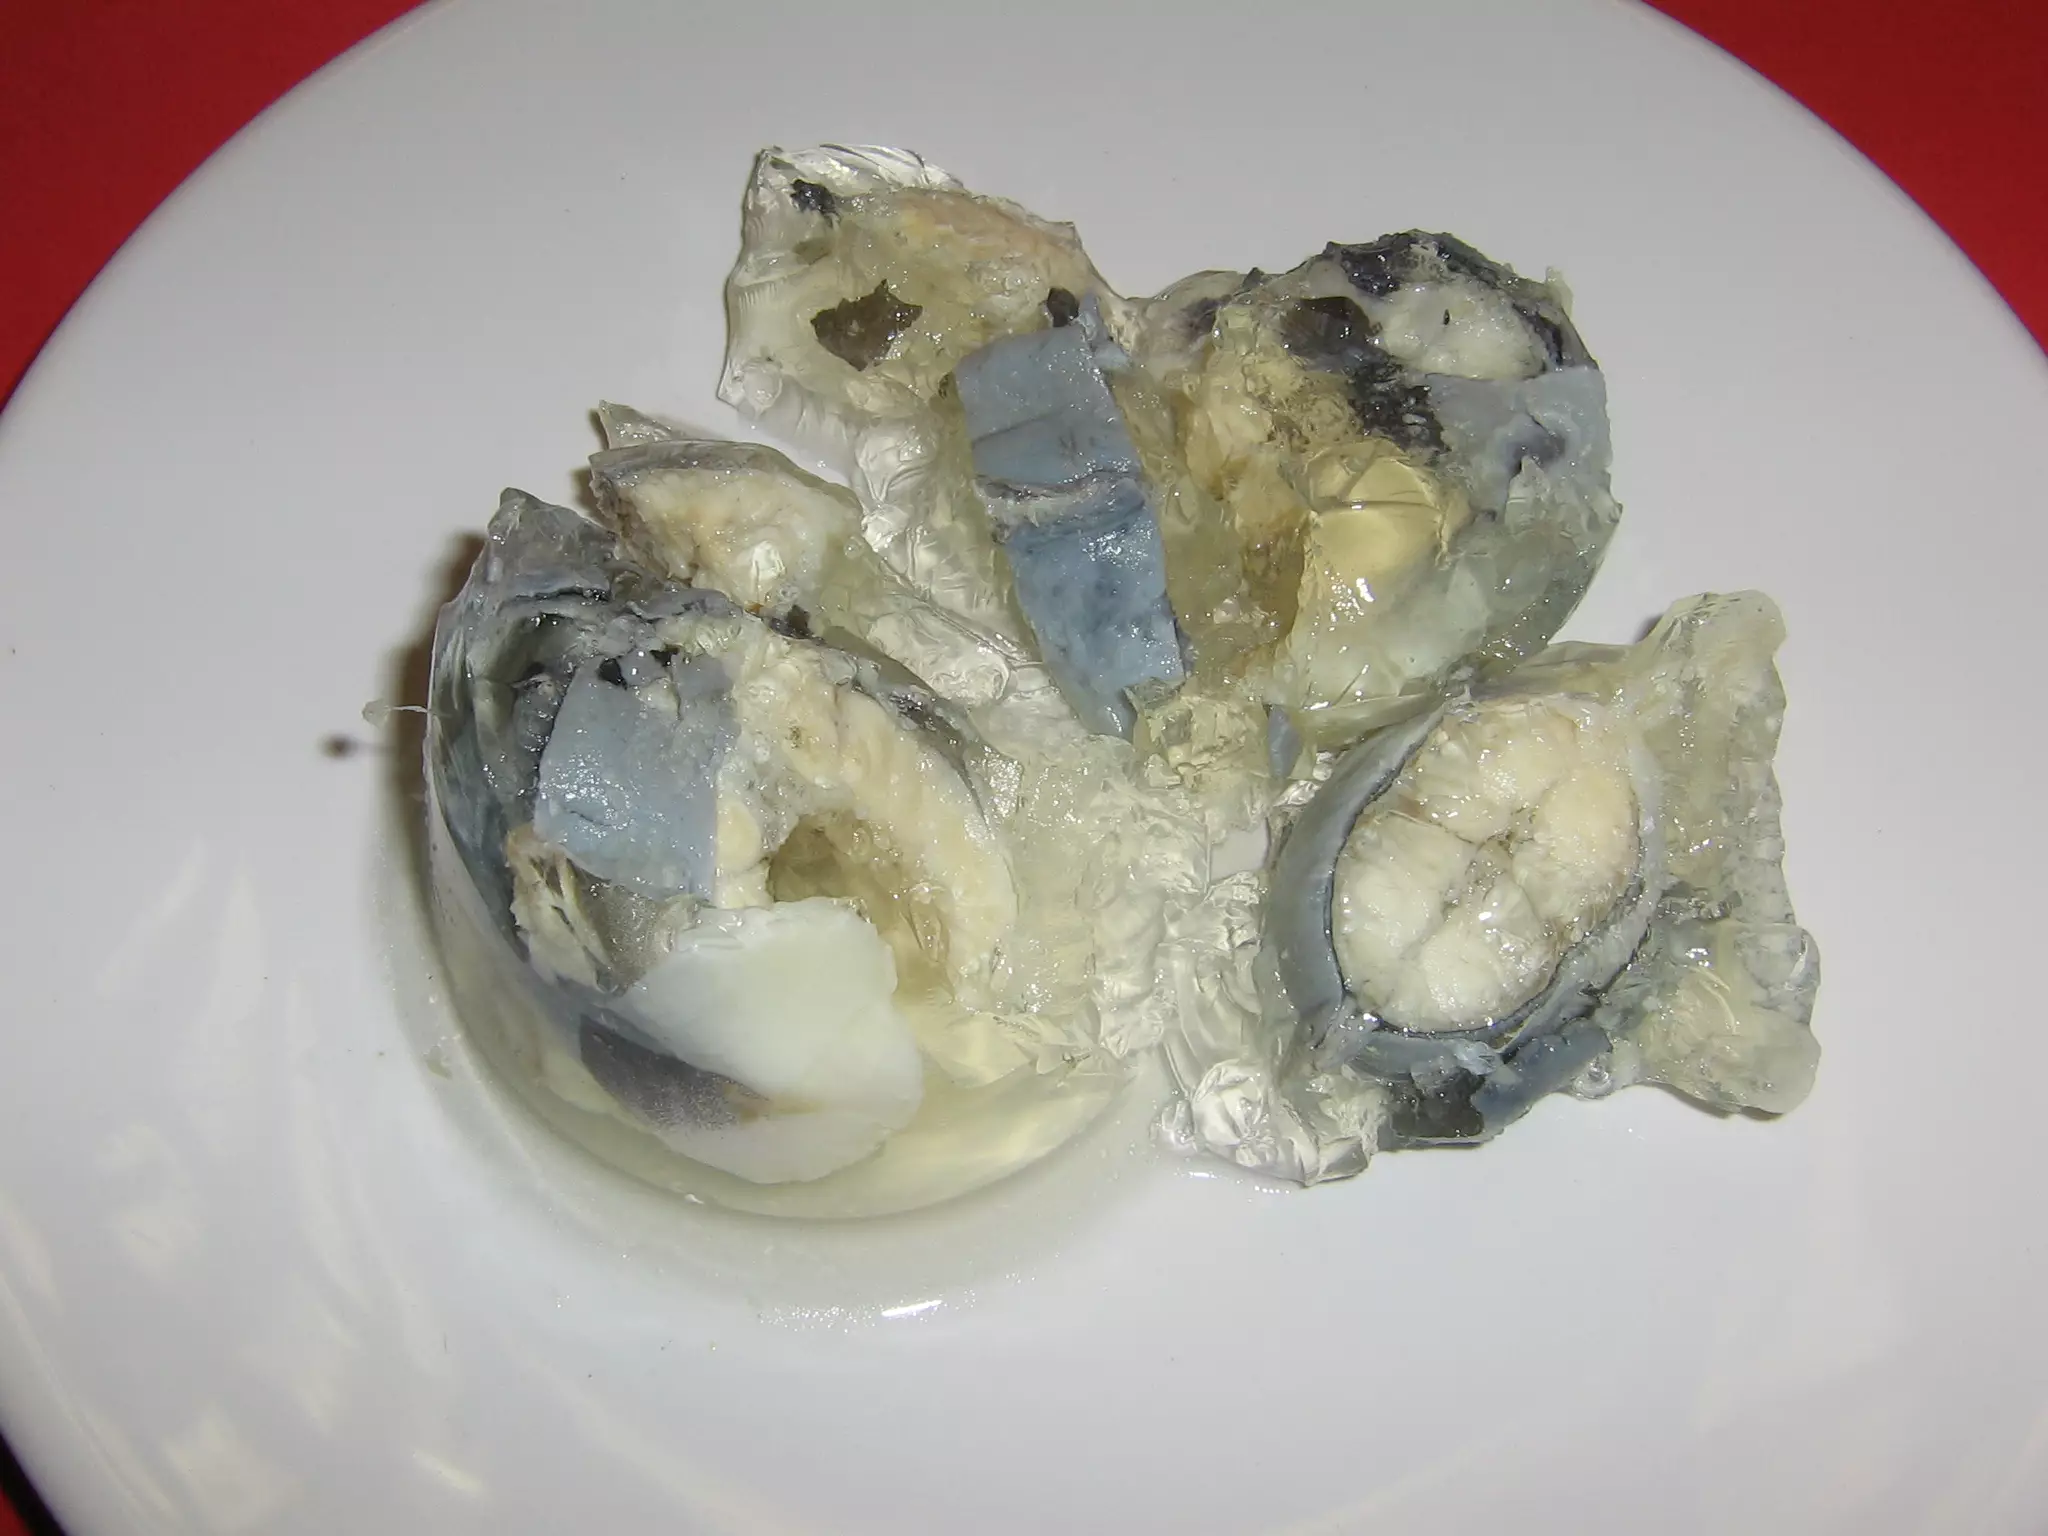 Jellied eels. Just no.